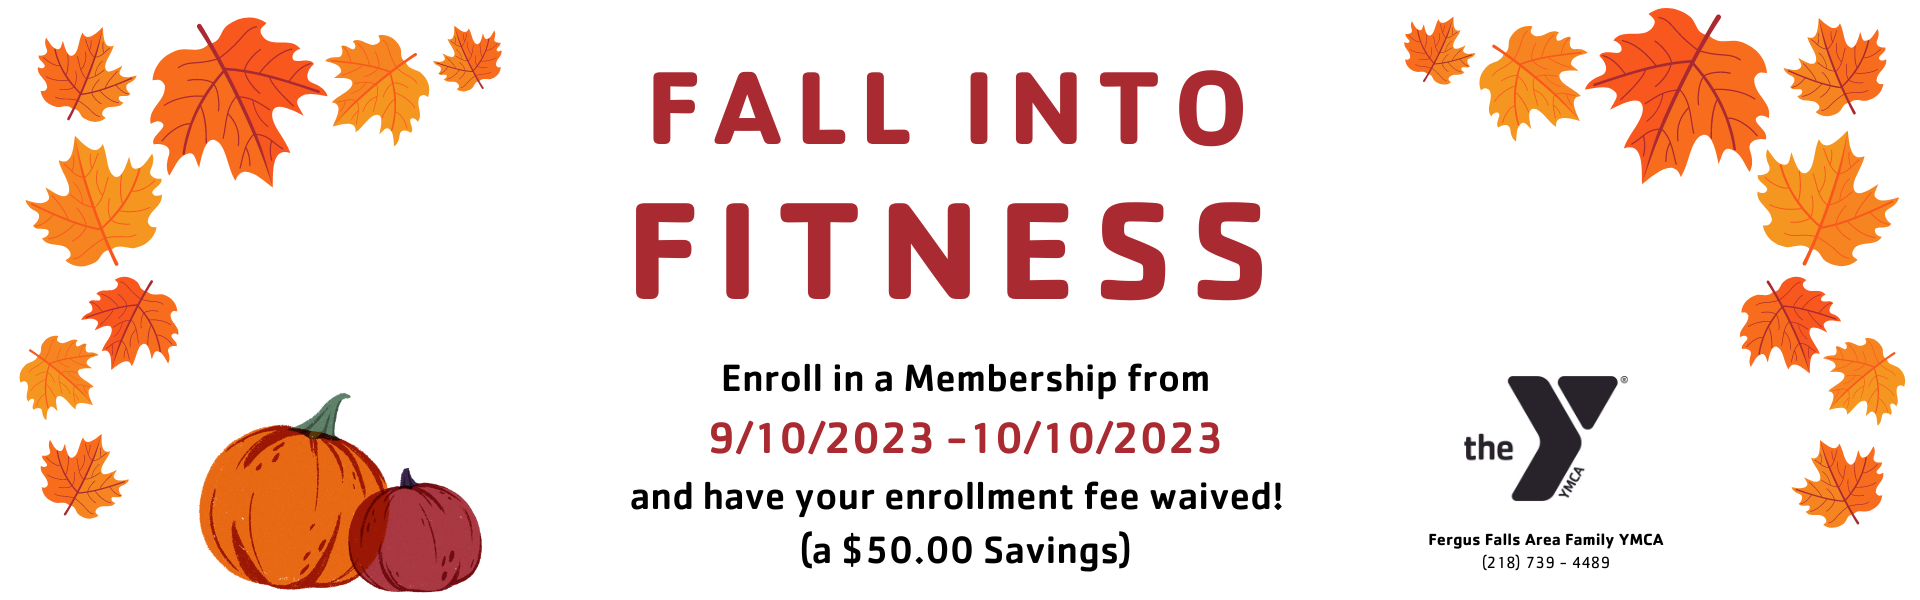 Fall Into Fitness!